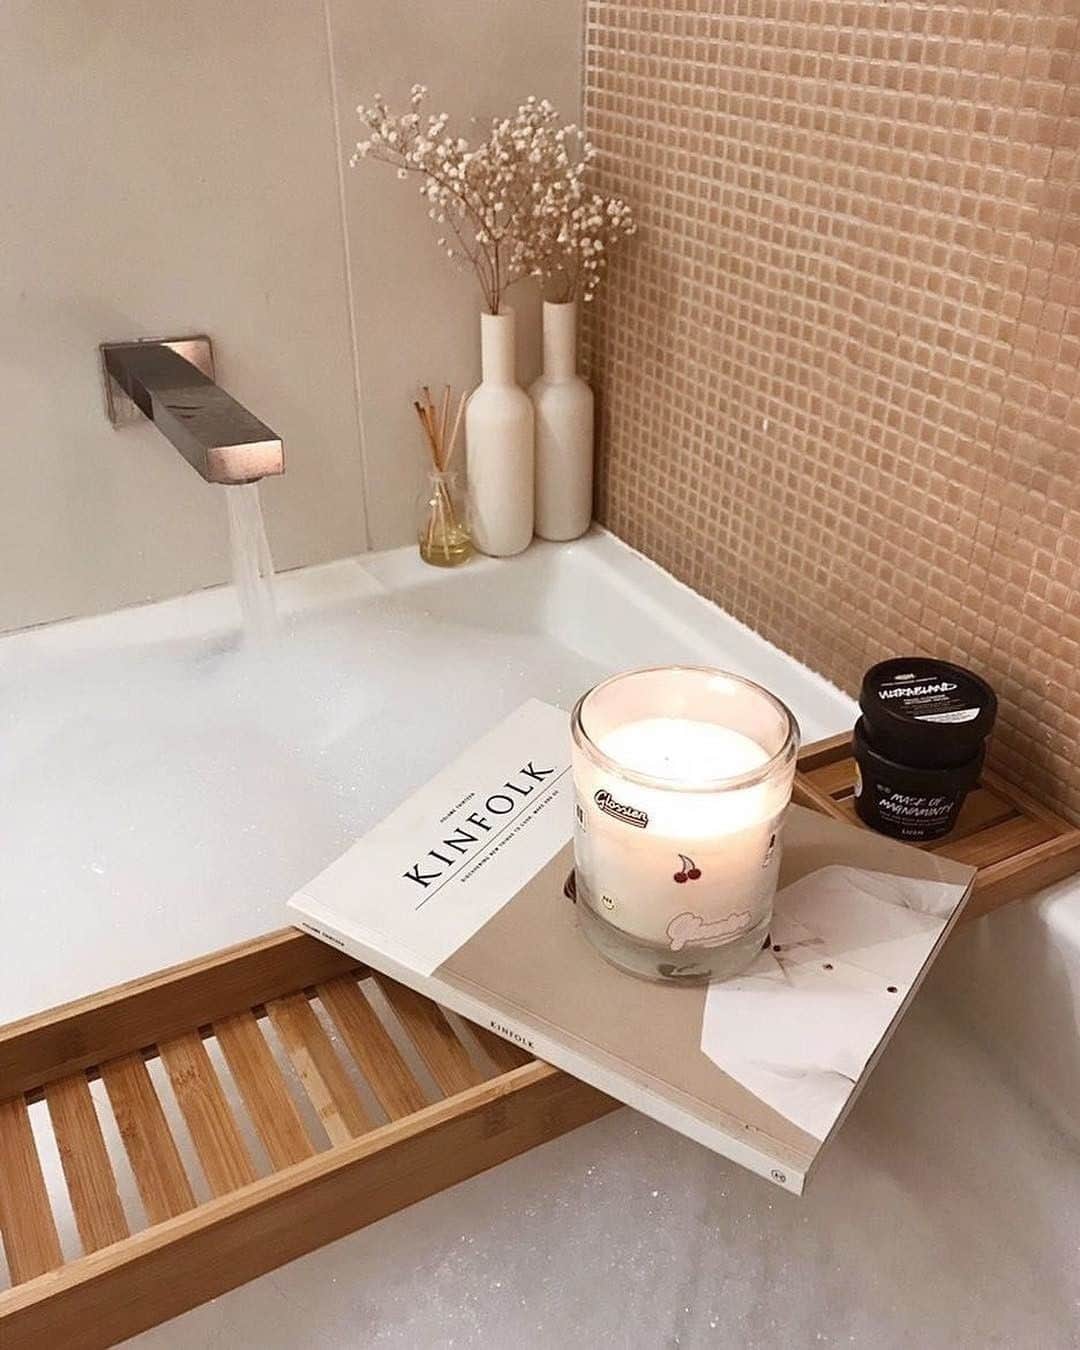 Marvis®️ Official Partnerさんのインスタグラム写真 - (Marvis®️ Official PartnerInstagram)「Midweek mindfulness with all the bubbles please! @byrdiebeauty @yzellebeauty ⠀⠀⠀⠀⠀⠀⠀⠀⠀⠀⠀⠀⠀⠀⠀ .⠀⠀⠀⠀⠀⠀⠀⠀⠀⠀⠀⠀ .⠀⠀⠀⠀⠀⠀⠀⠀⠀⠀⠀⠀⠀⠀⠀⠀⠀⠀ .⠀⠀⠀⠀⠀⠀⠀⠀⠀⠀⠀⠀⠀⠀⠀⠀⠀⠀ .⠀⠀⠀⠀⠀⠀⠀⠀⠀⠀⠀⠀⠀⠀⠀⠀⠀⠀ .⠀⠀⠀⠀⠀⠀⠀⠀⠀⠀⠀⠀⠀⠀⠀⠀⠀⠀ #luxurylife #littleluxuries #cobigelow #marvis #marvistoothpaste #morningswithmarvis #showusyourflavor #healthyteeth #pearlywhites #topshelf #topshelfie #itgtopshelfie #beautyjunkie #flavor #beautyrituals #healthandwellness #morningroutine」5月29日 22時45分 - marvis_usa